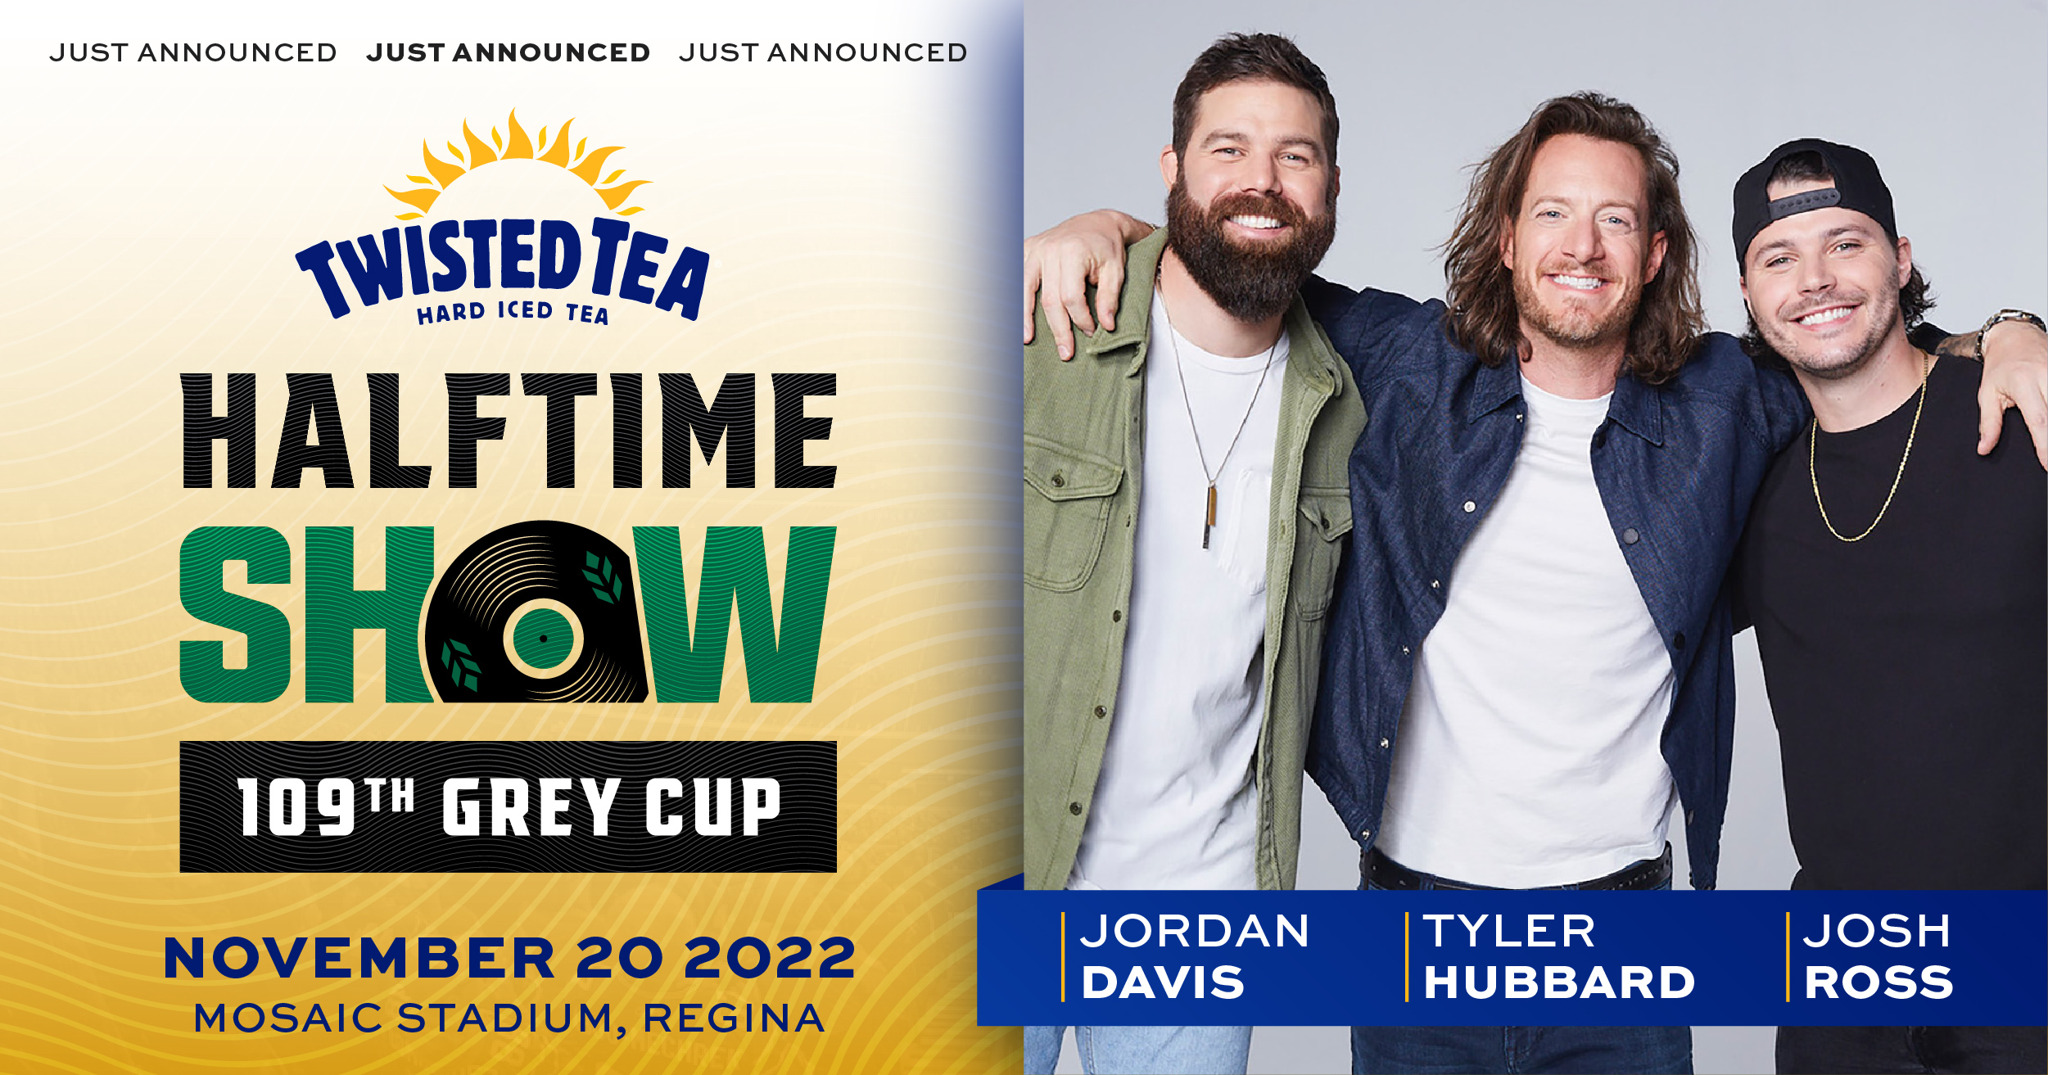 COUNTRY ALLSTARS UNITE FOR TWISTED TEA GREY CUP HALFTIME SHOW